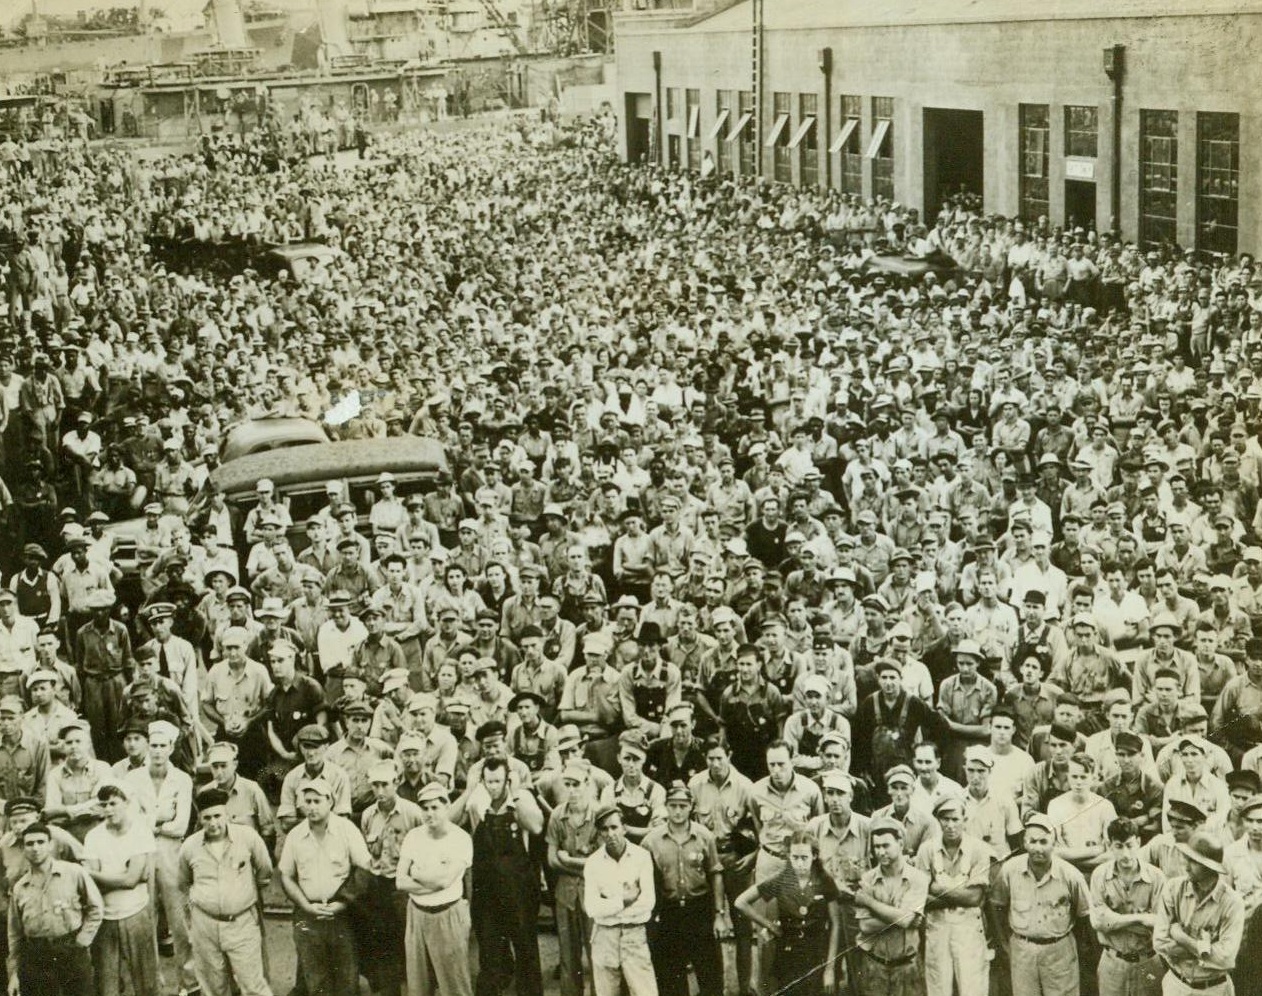 Charleston Navy Yard Workers' Labor Day Meeting, 9/8/1942. Charleston, S.C. -- Here's part of the large crowd of workers which attended the Labor Day celebration at the Charleston Navy Yard -- After day's work was over. Celebration included the laying of two keels for landing ships. Workers at the yard pledged to build more ships, better ships, and buy more bonds to finance ships. 9/8/42 (ACME);